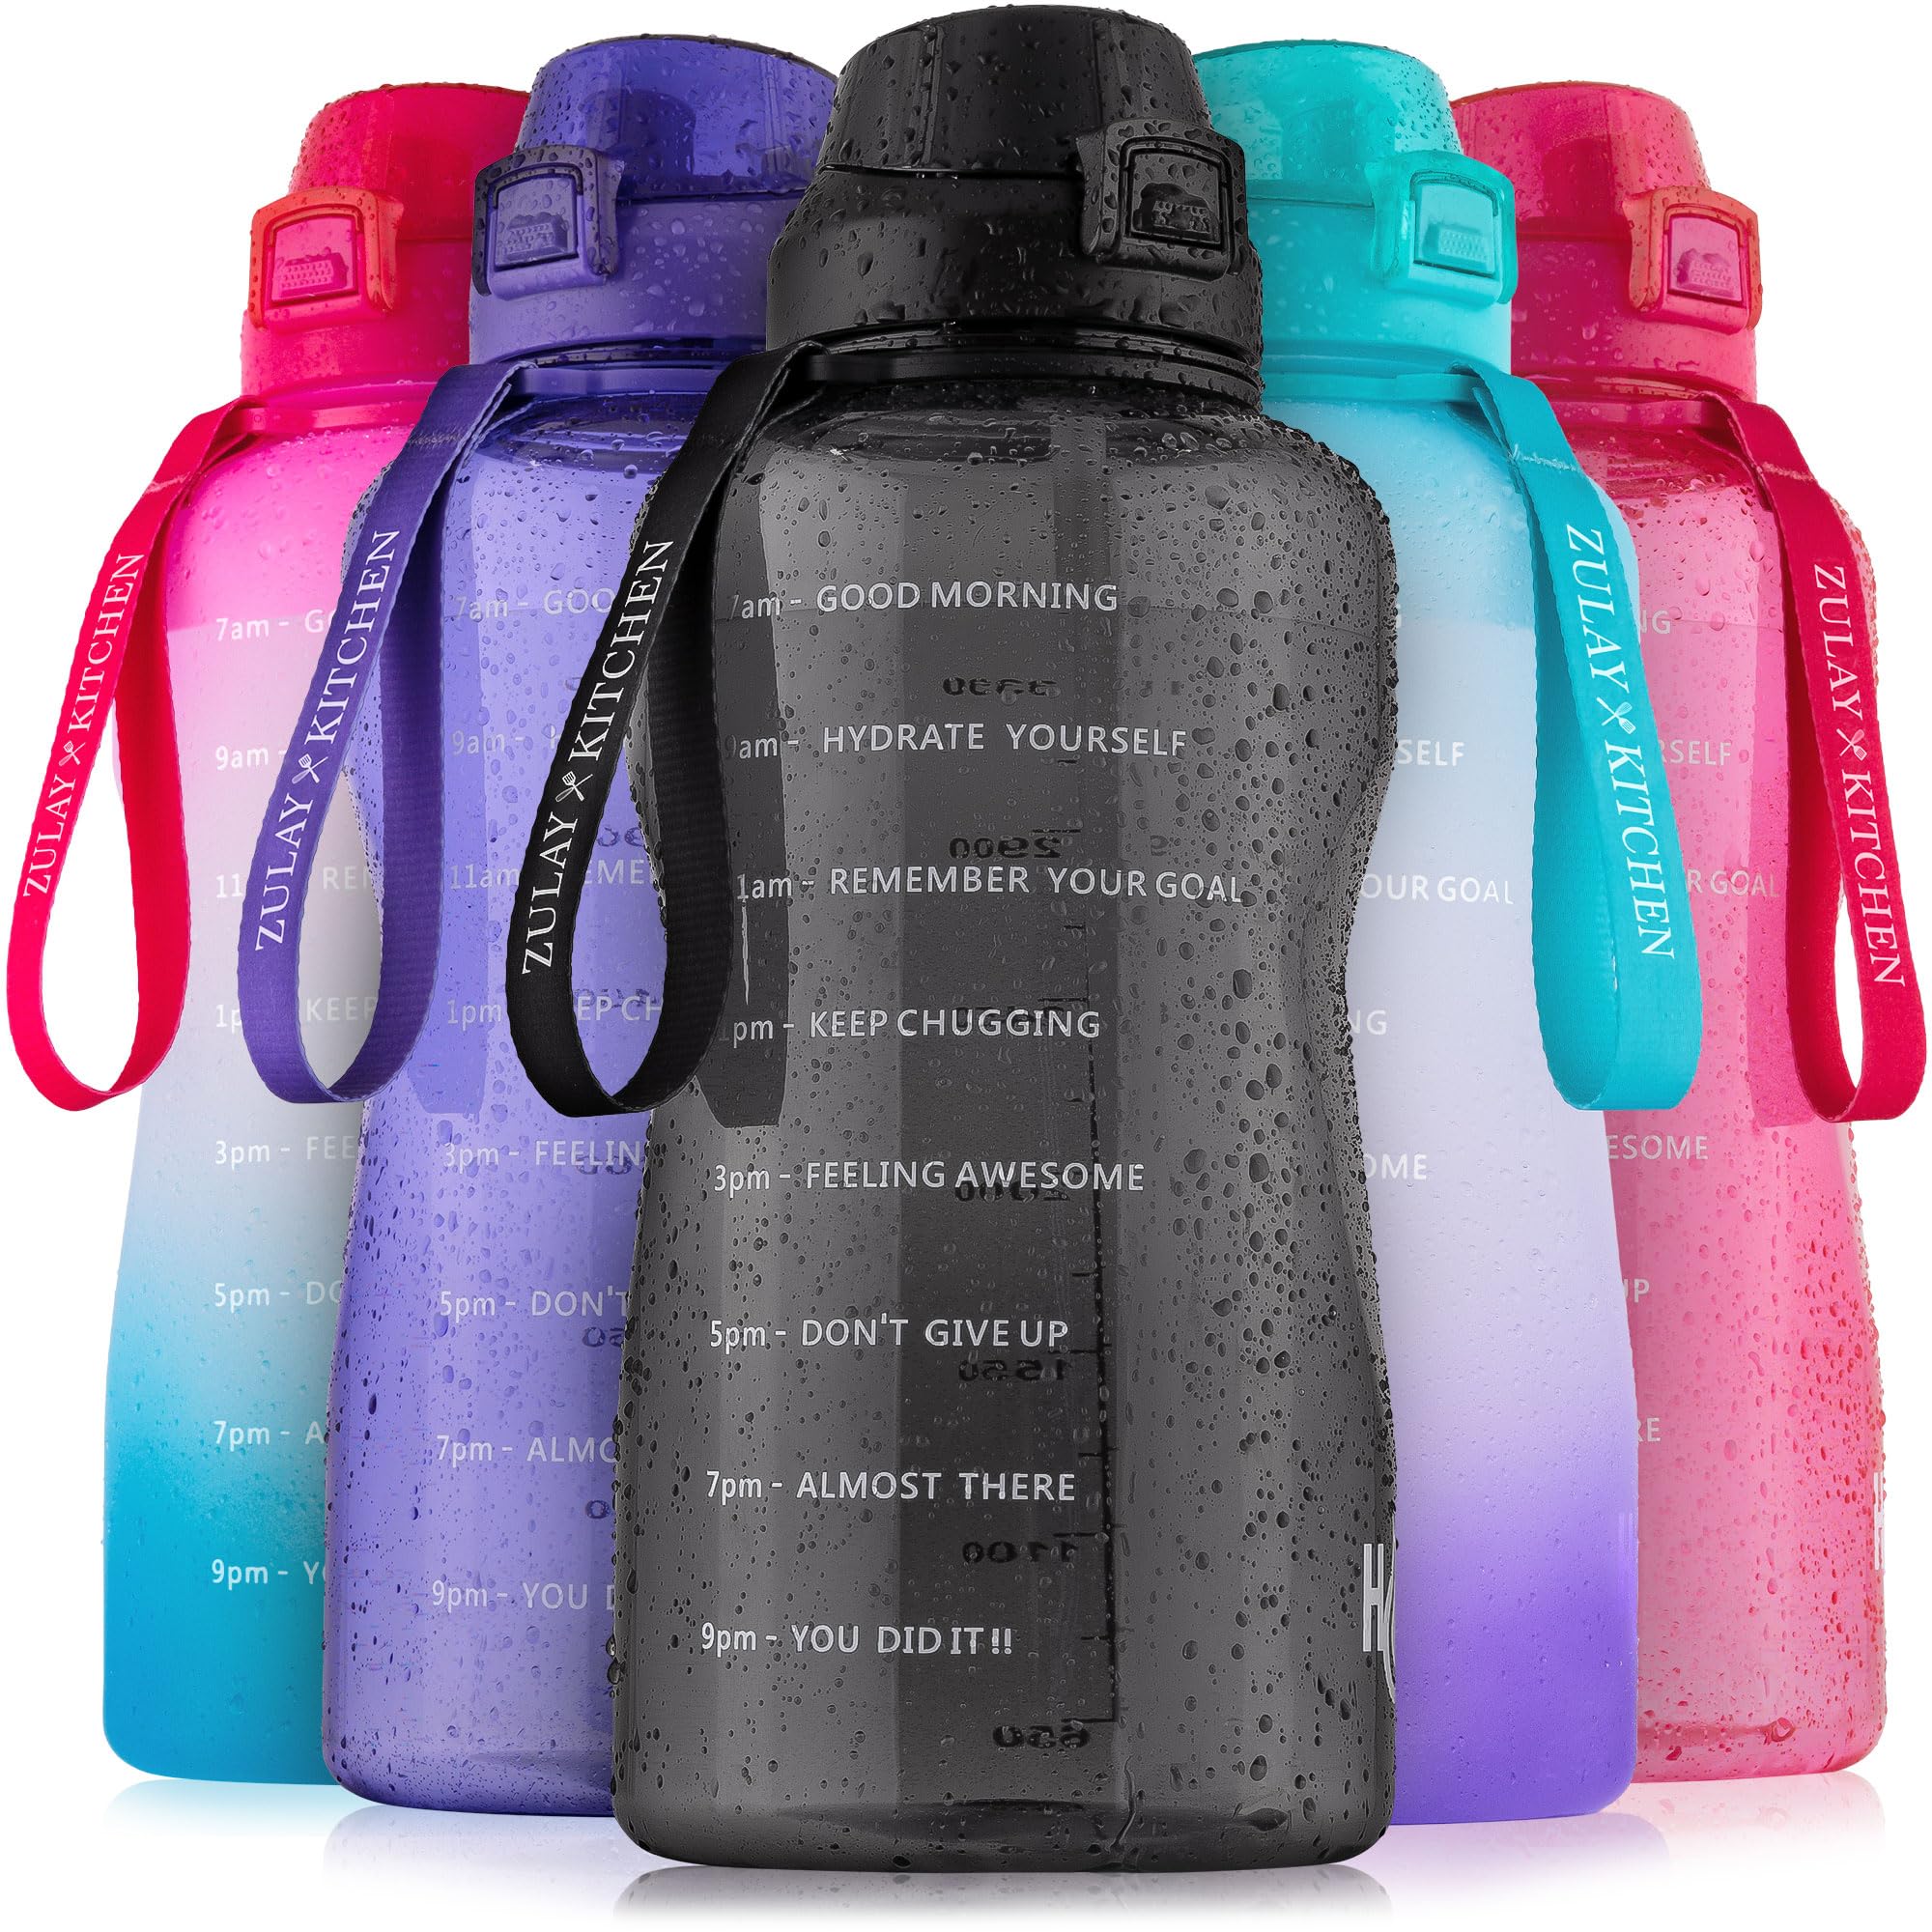 Hydration Nation 1 Gallon Water Bottle With Straw - BPA Free Gallon Water Bottle Motivational With Straw & Time Marker Quotes - Leakproof Water Jug 1 Gallon For Fitness, Sports & More (Black)